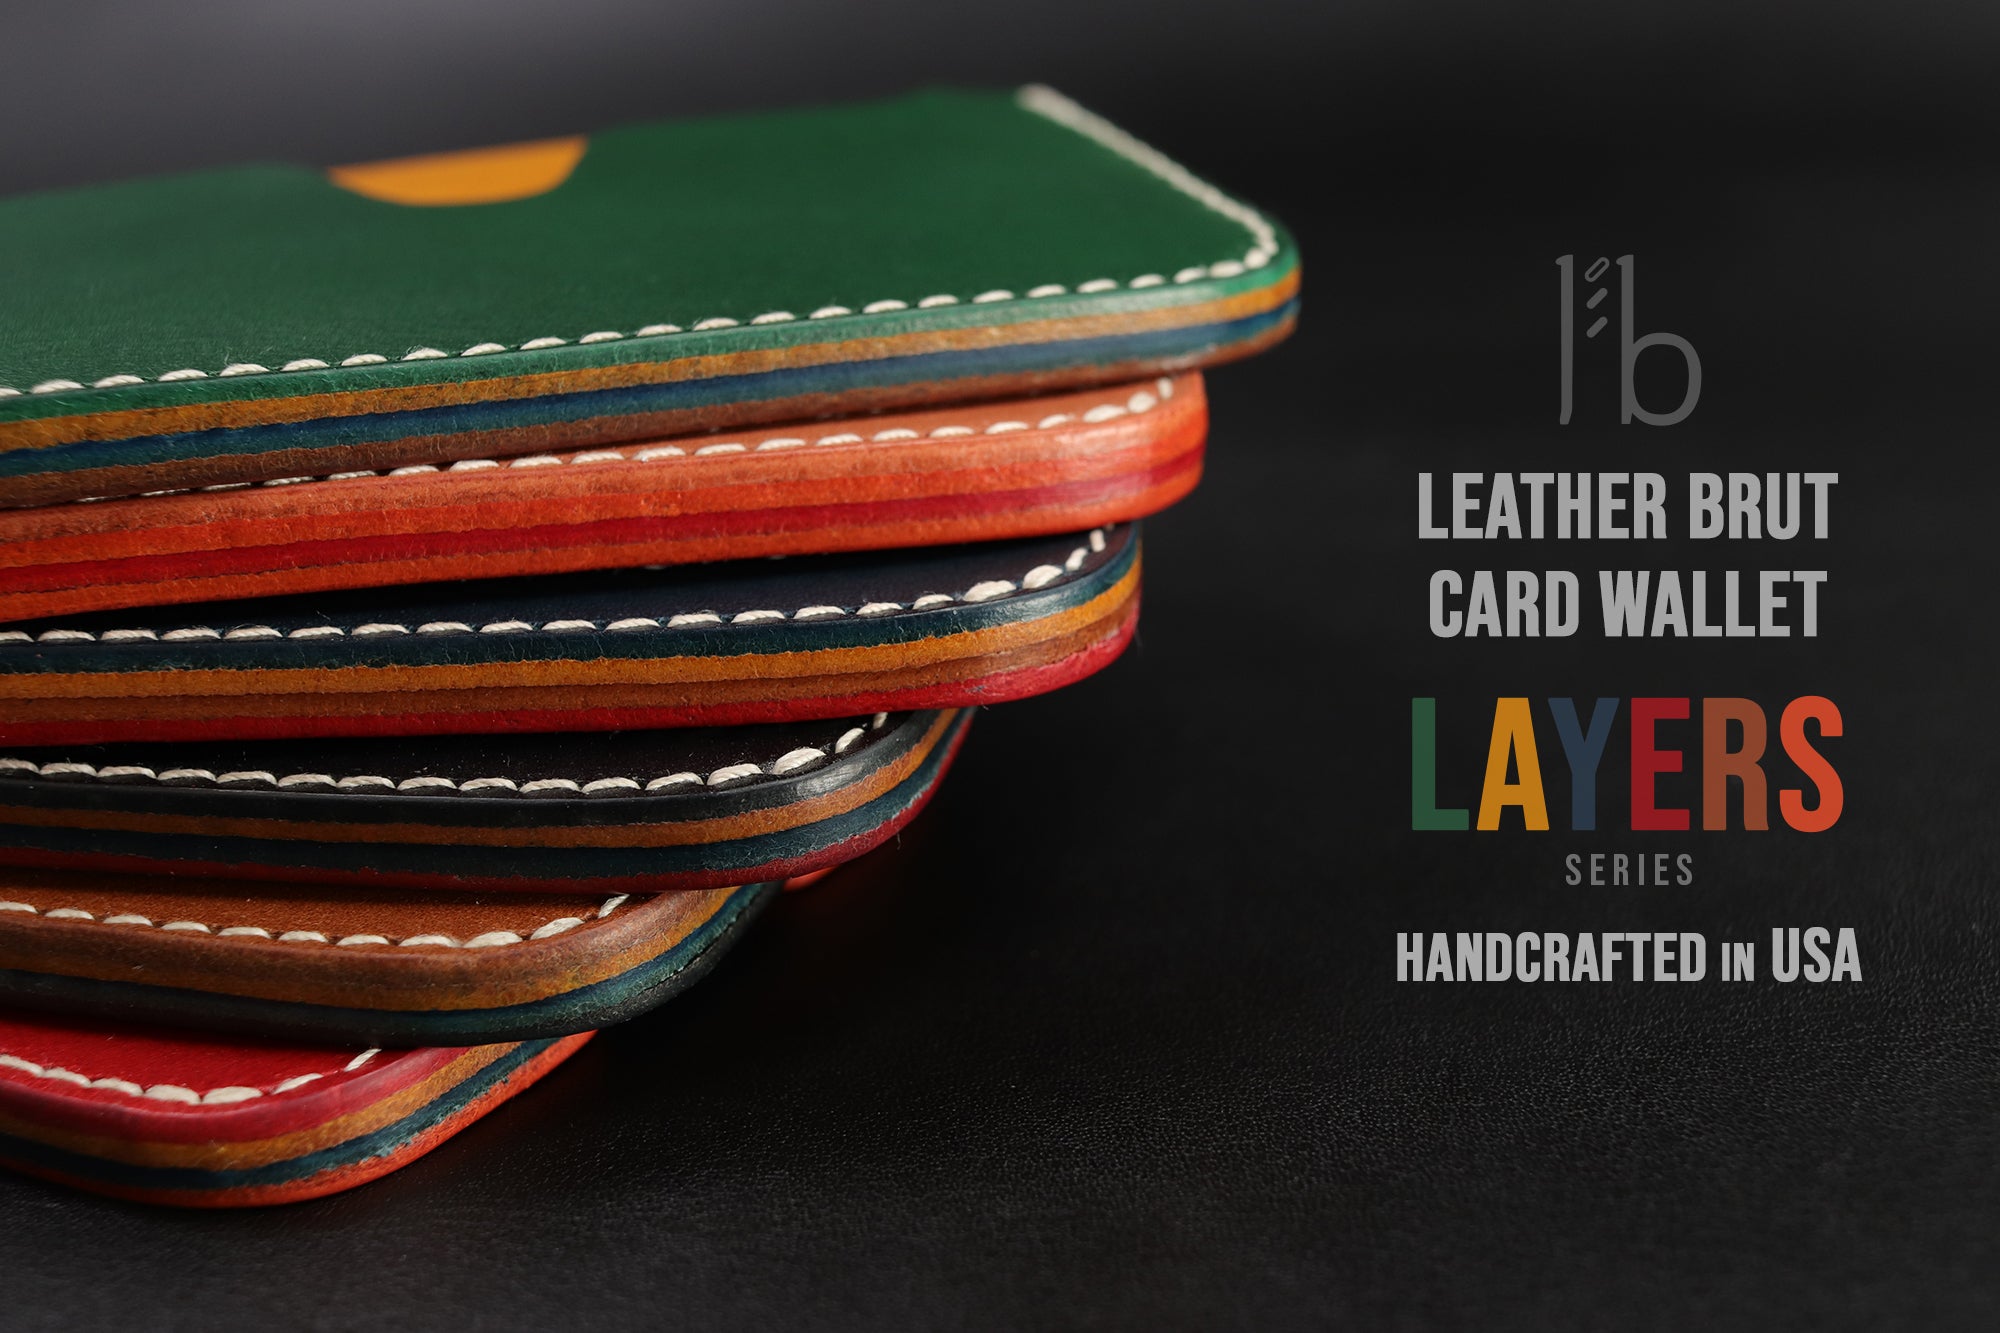 Leather Card Wallet [LC-RONO] - LAYERS SERIES - Card Holder - Premium Italian Veg-Tanned Leather - Personalized Stamp - Handcrafted in USA